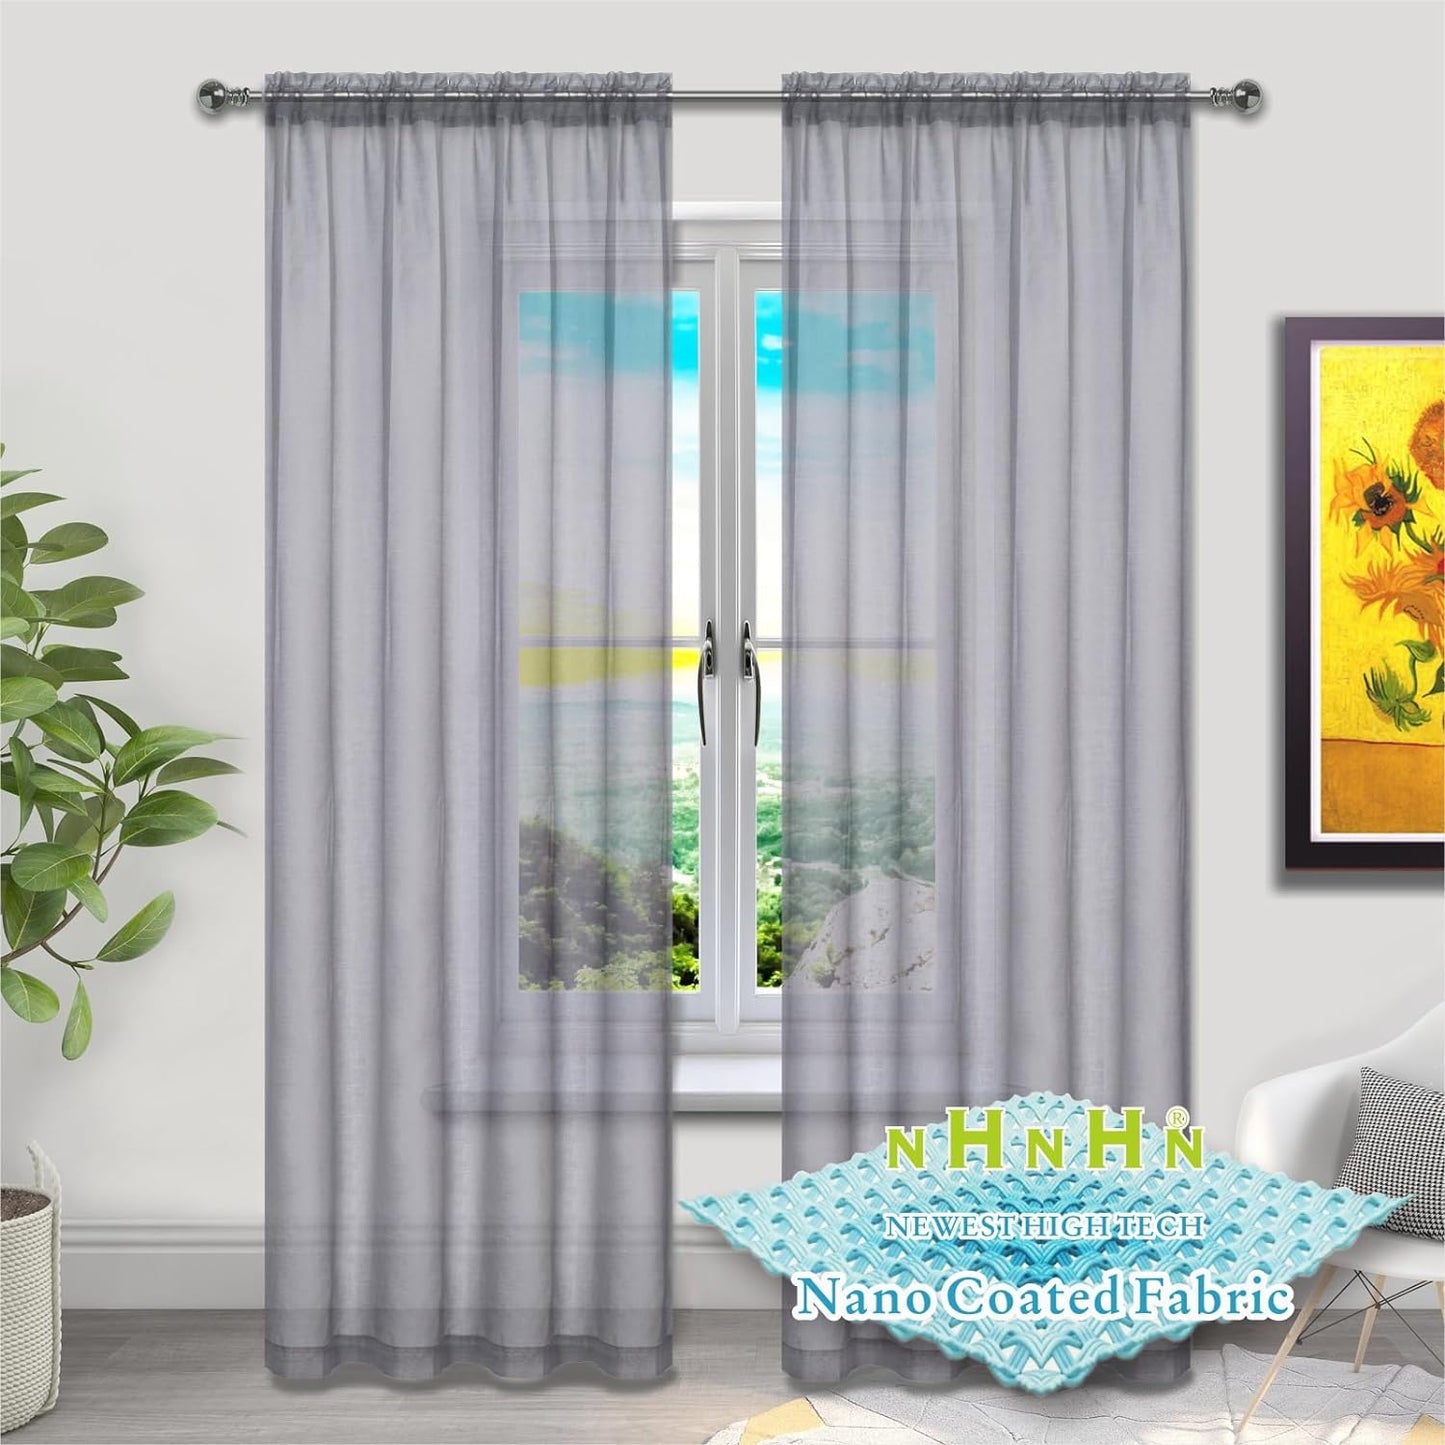 NHNHN Nano Material Coated White Sheer Curtains 84 Inches Long, Rod Pocket Window Drapes Voile Sheer Curtain 2 Panels for Living Room Bedroom Kitchen (White, W52 X L84)  NHNHN Grey 52W X 72L | 2 Panels 